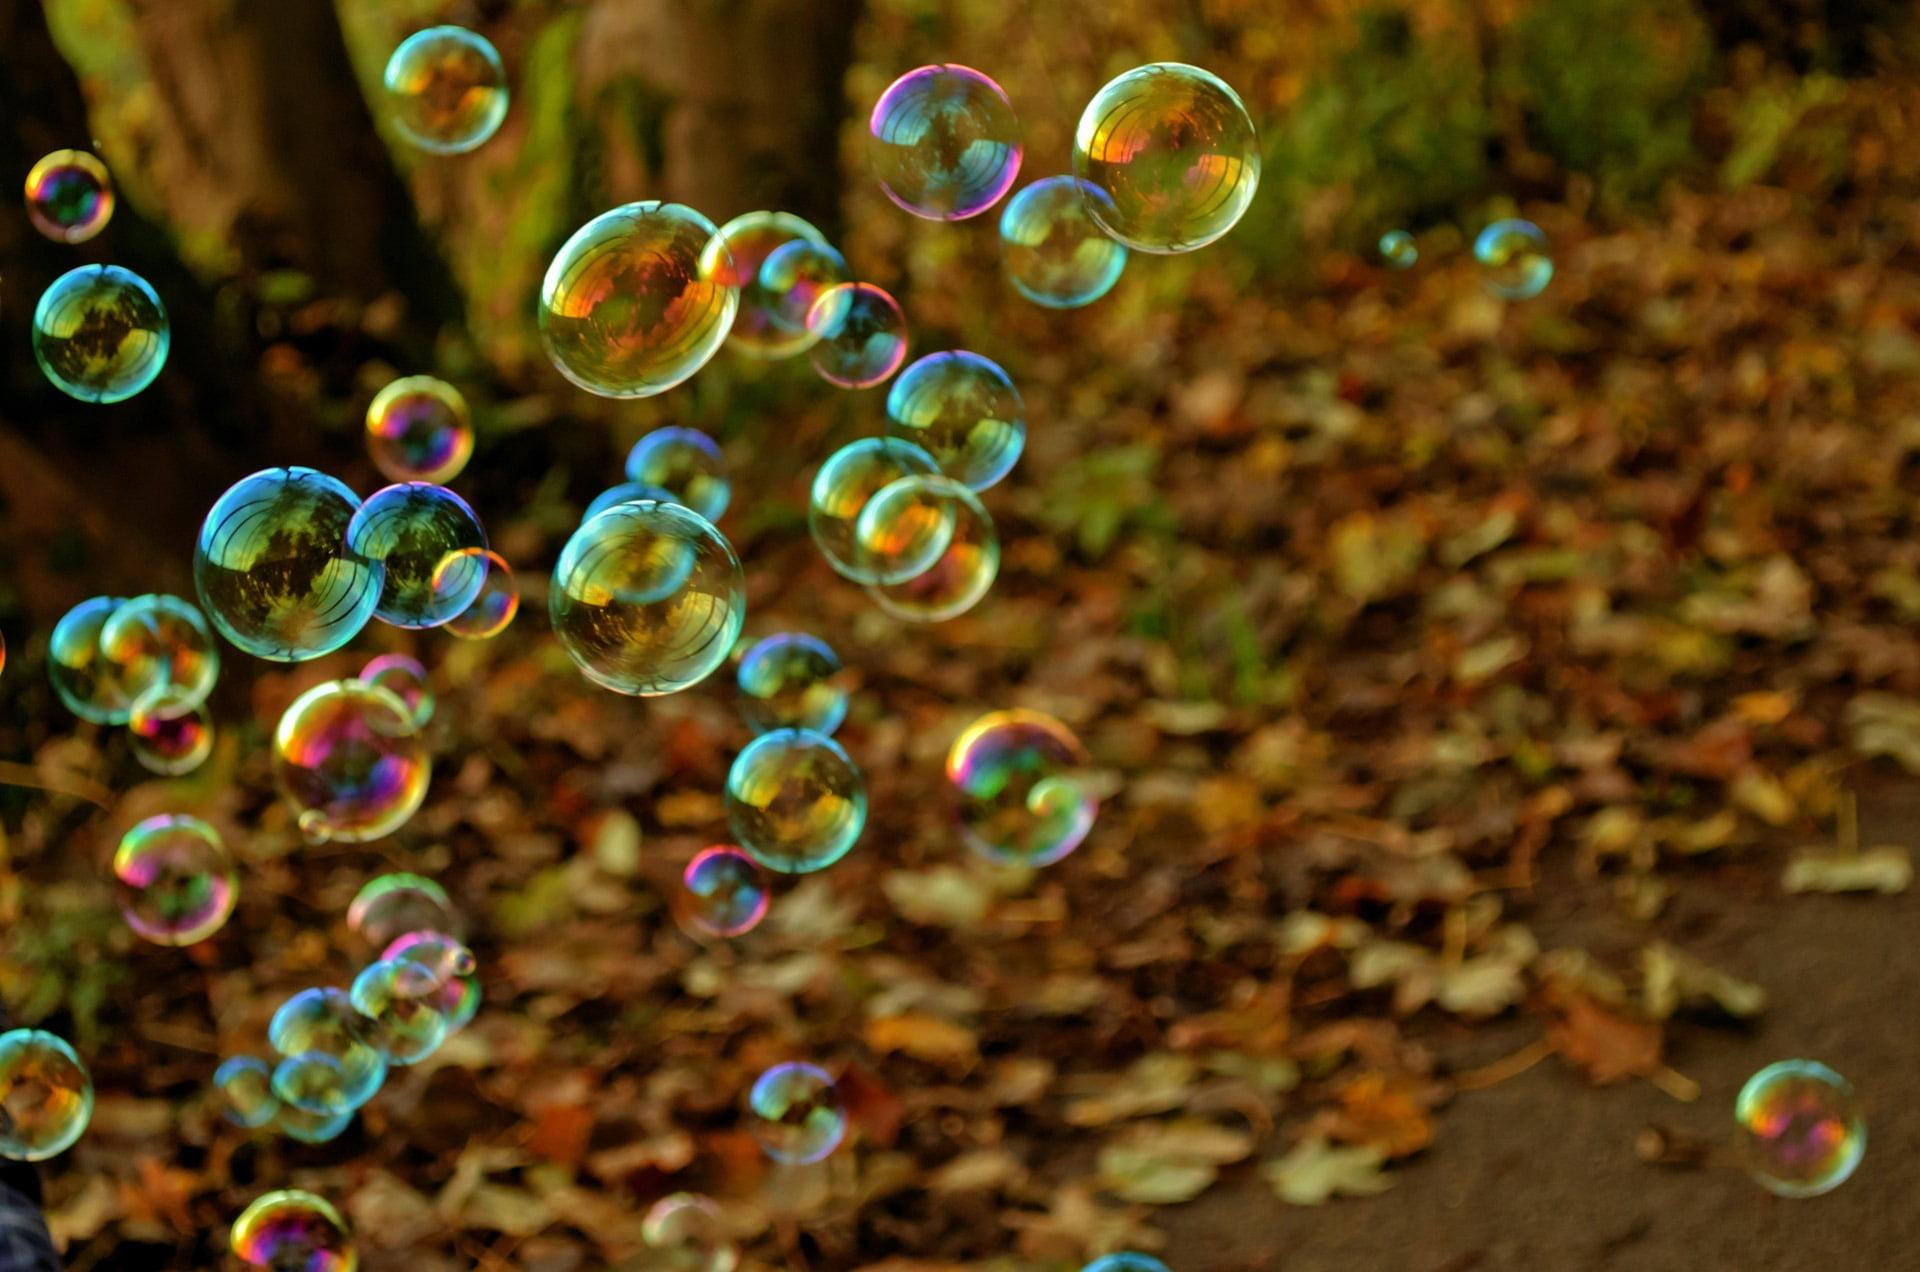 Close up photo of iridescent bubbles near dried leaves HD